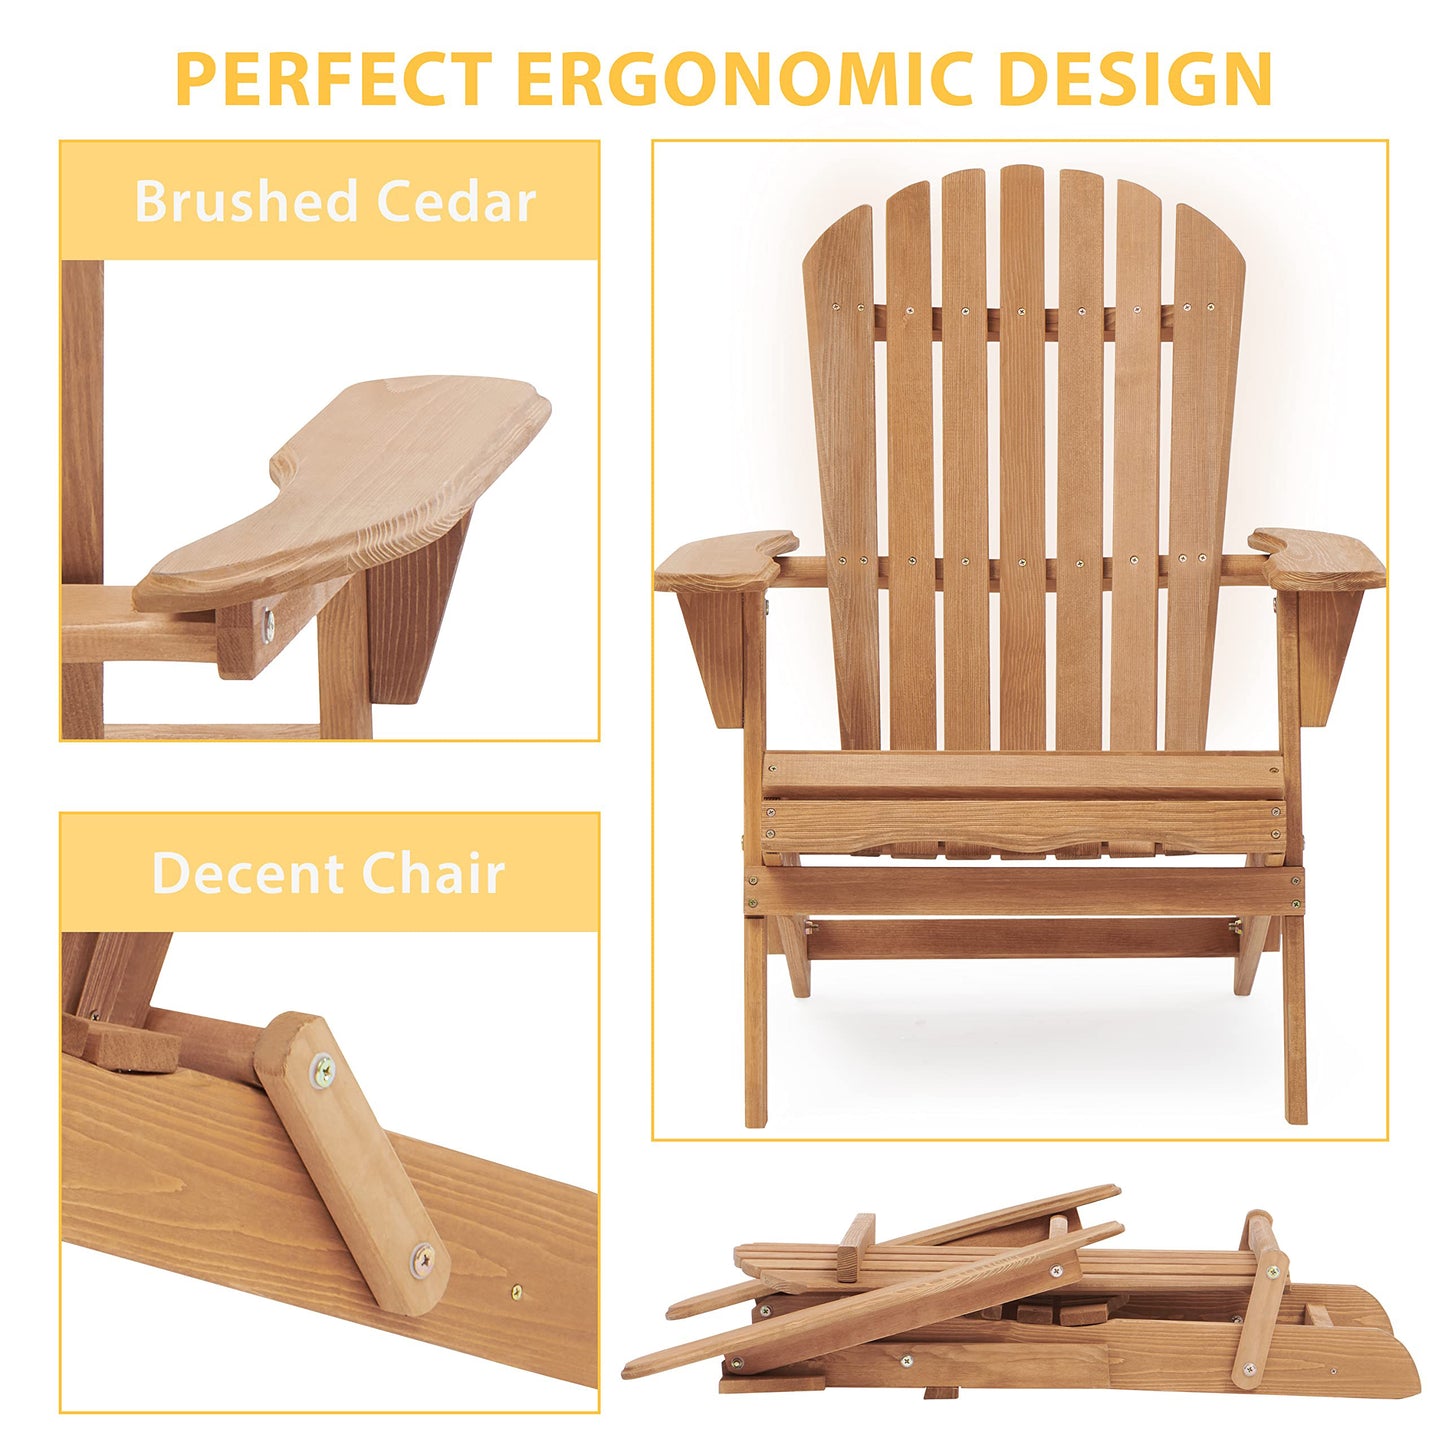 Outdoor Folding Wood Adirondack Chair Set of 2 for Garden and Patio